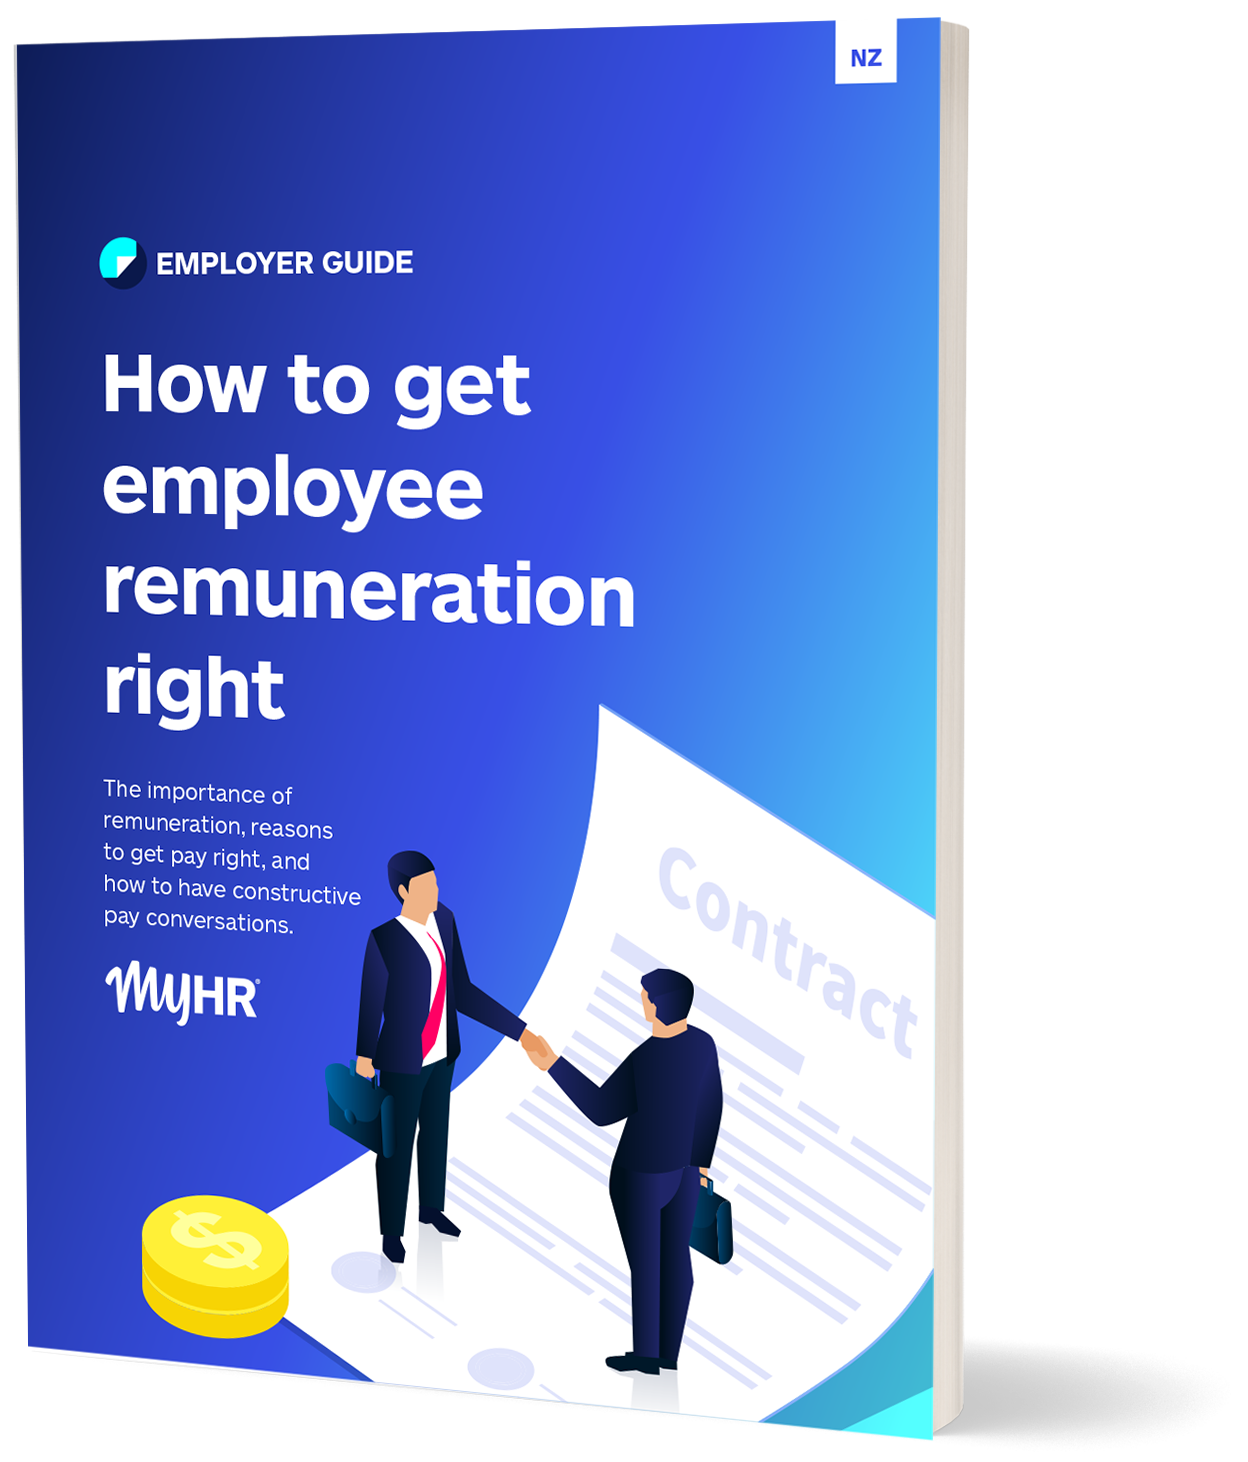 NZ Guide Image_Remuneration_Employee Guide_Cover copy